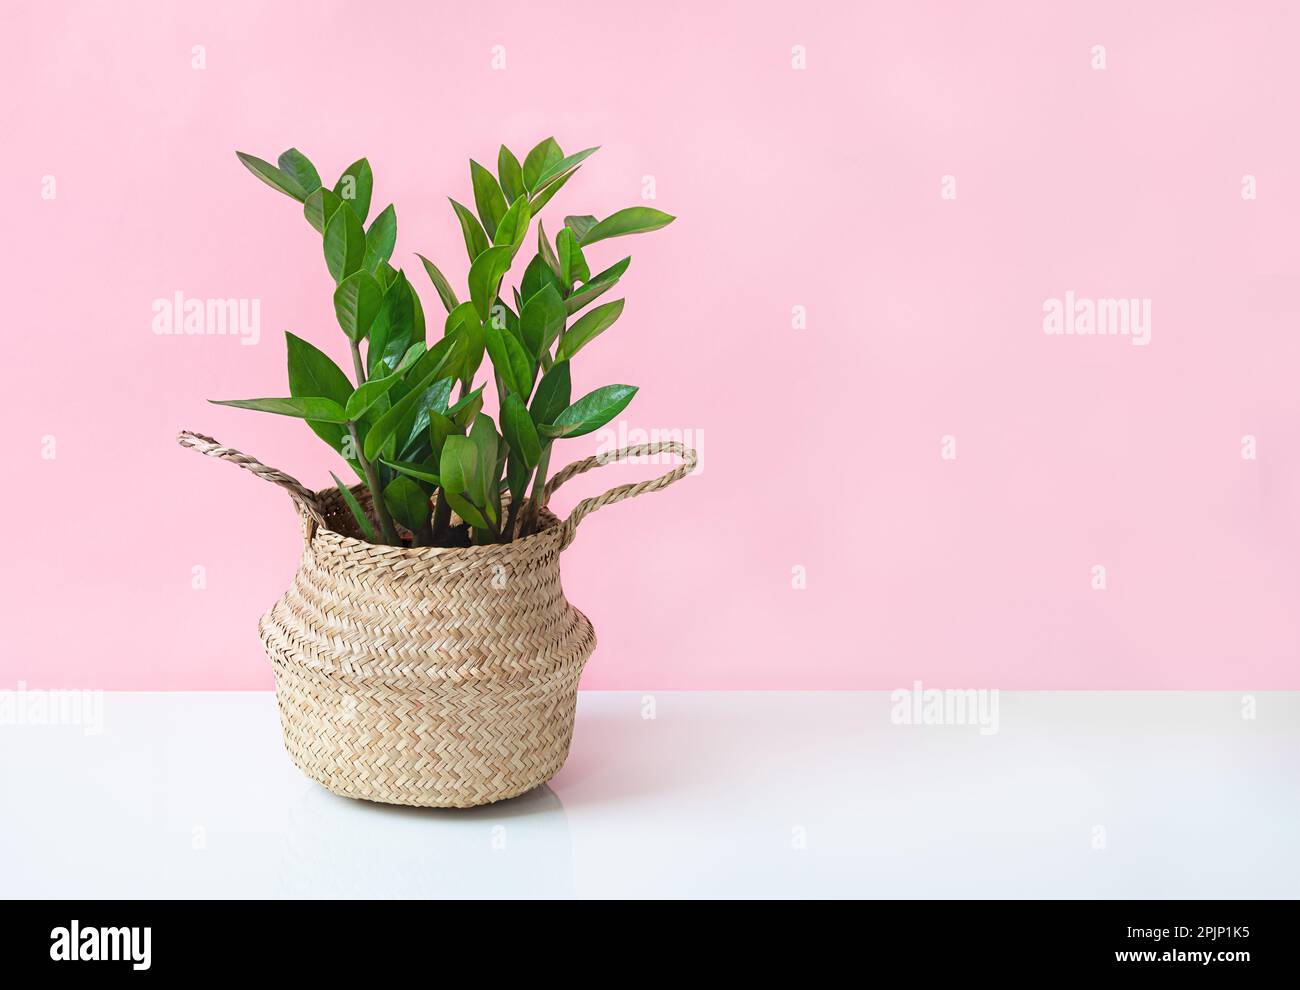 Zamioculcas, or zamiifolia zz plant in a wicker pot on a white table near pink wall, home gardening and minimal home decor concept Stock Photo